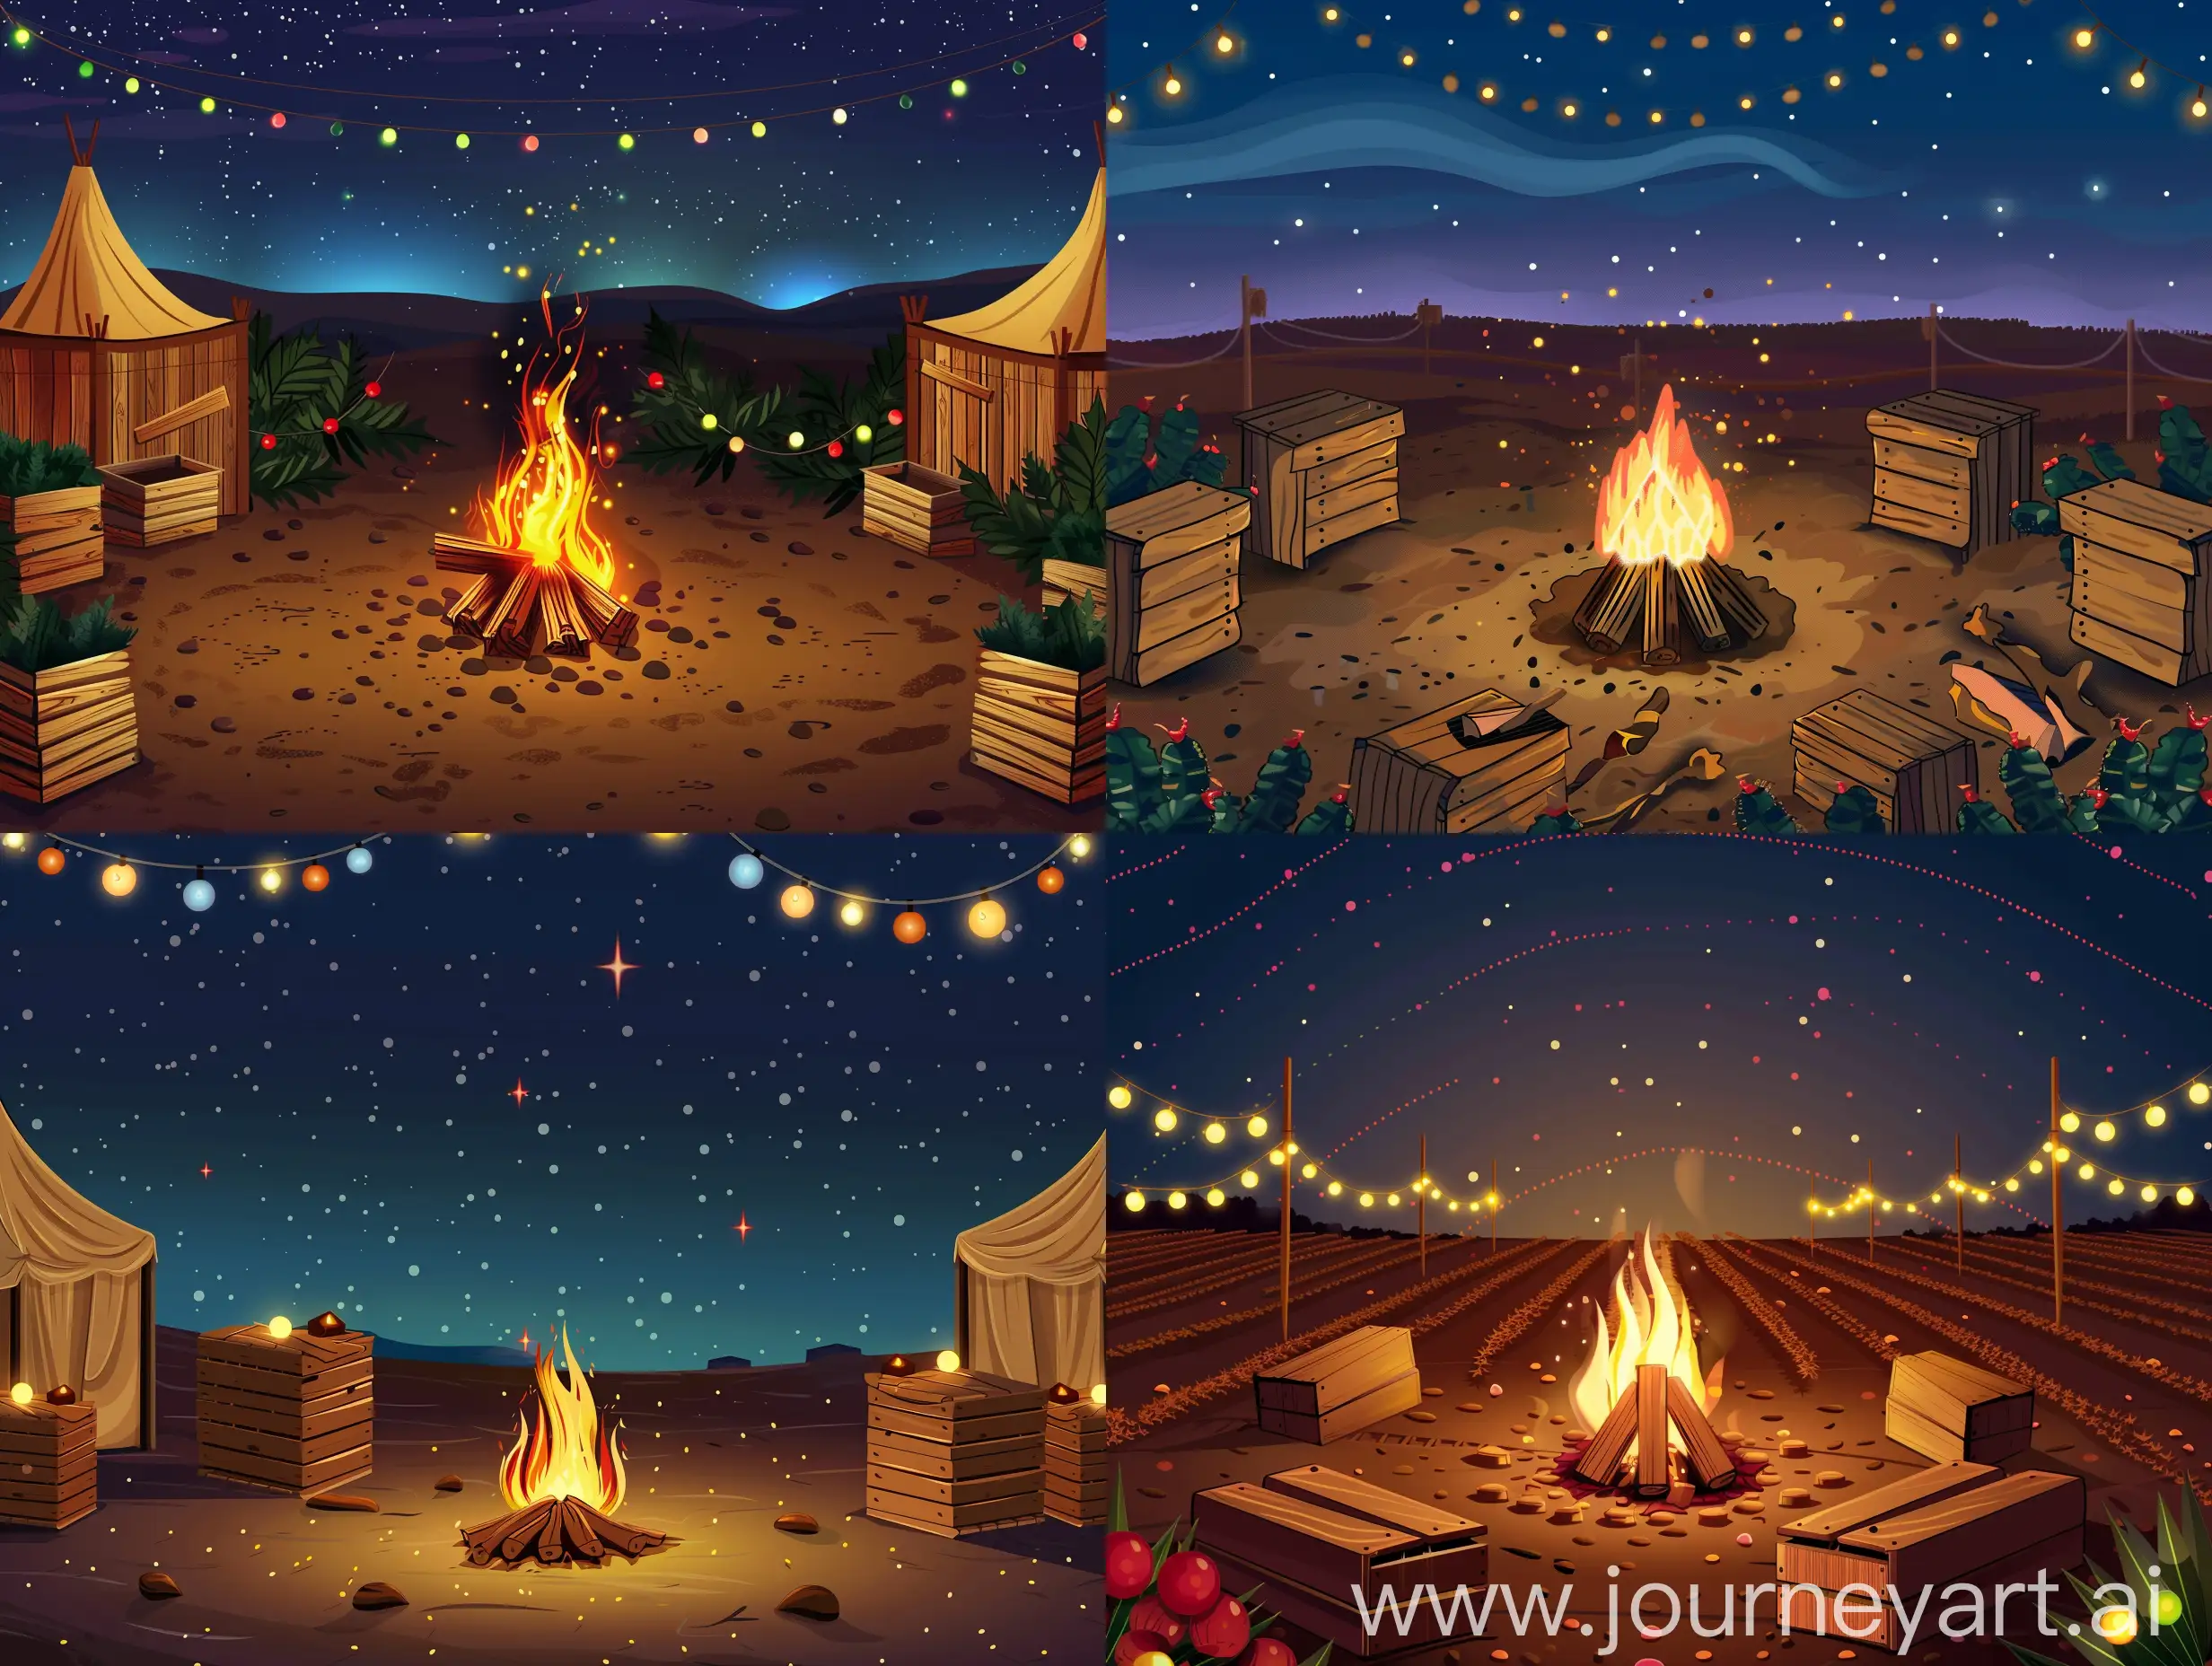 Rustic-Night-Campfire-Scene-on-Arable-Land-with-Wooden-Crates-and-Decorative-Lights